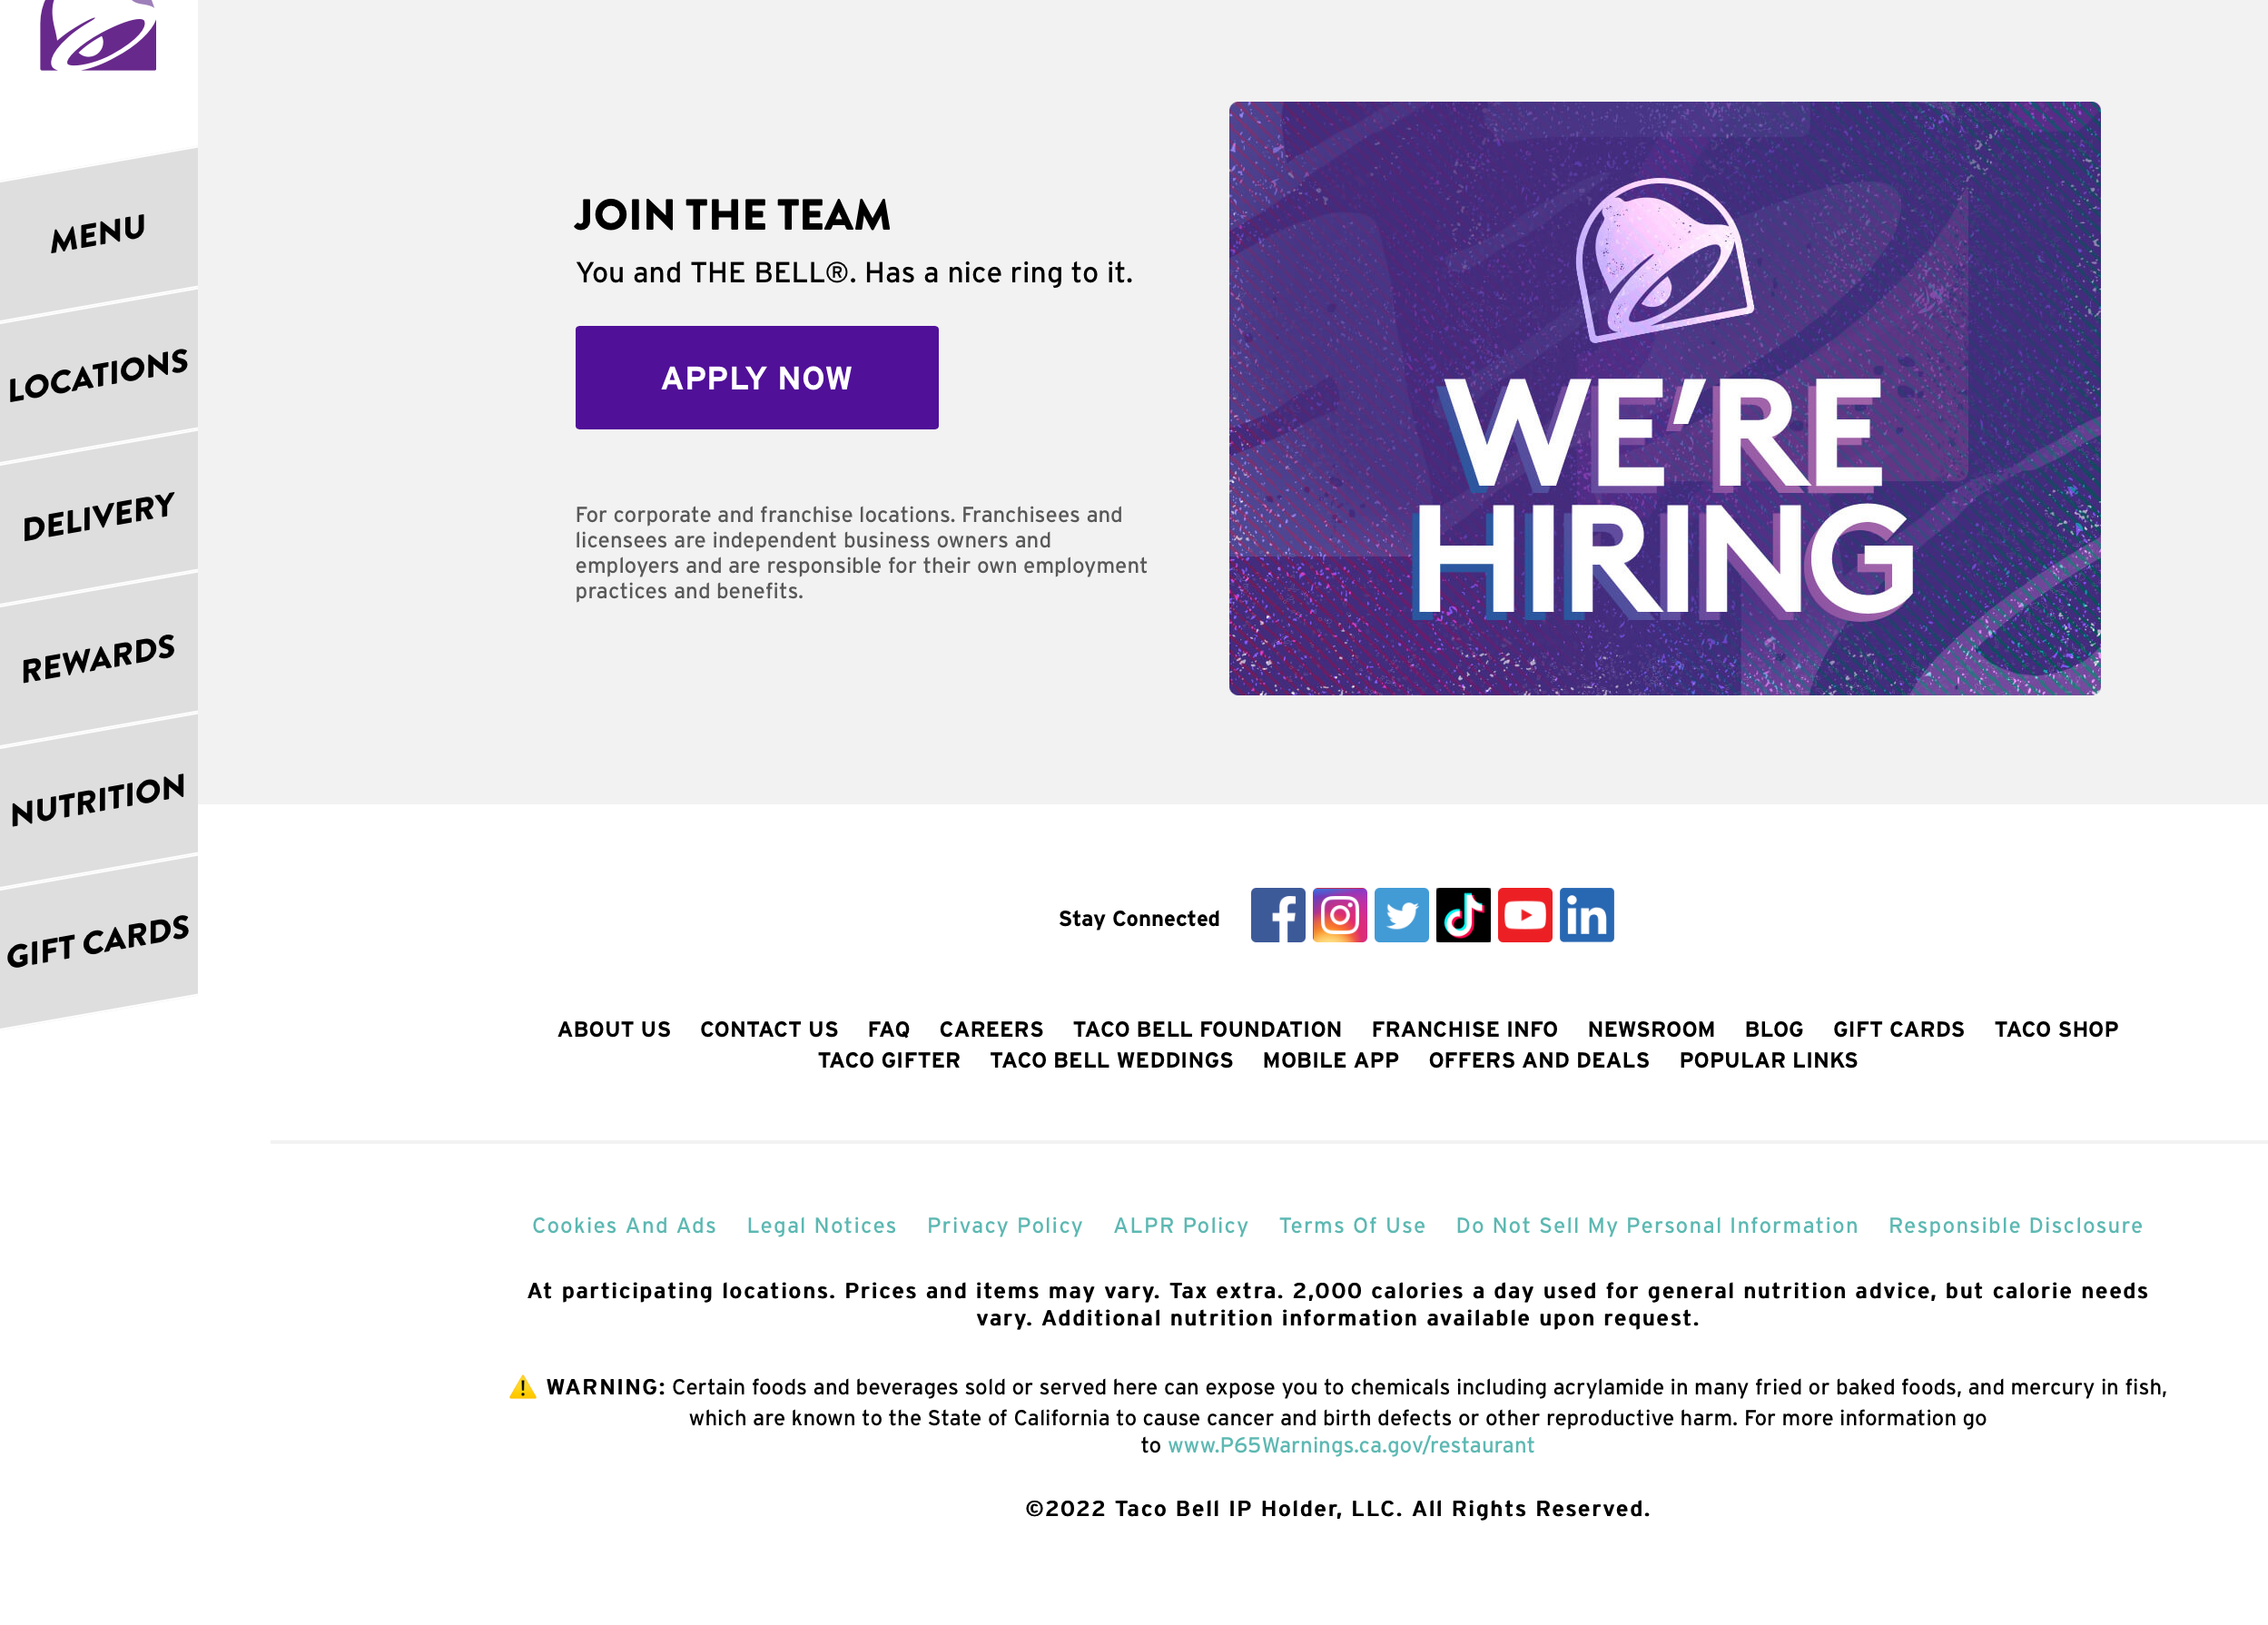 Taco Bell is bad news (Pay close attention to the words at the bottom of their website).